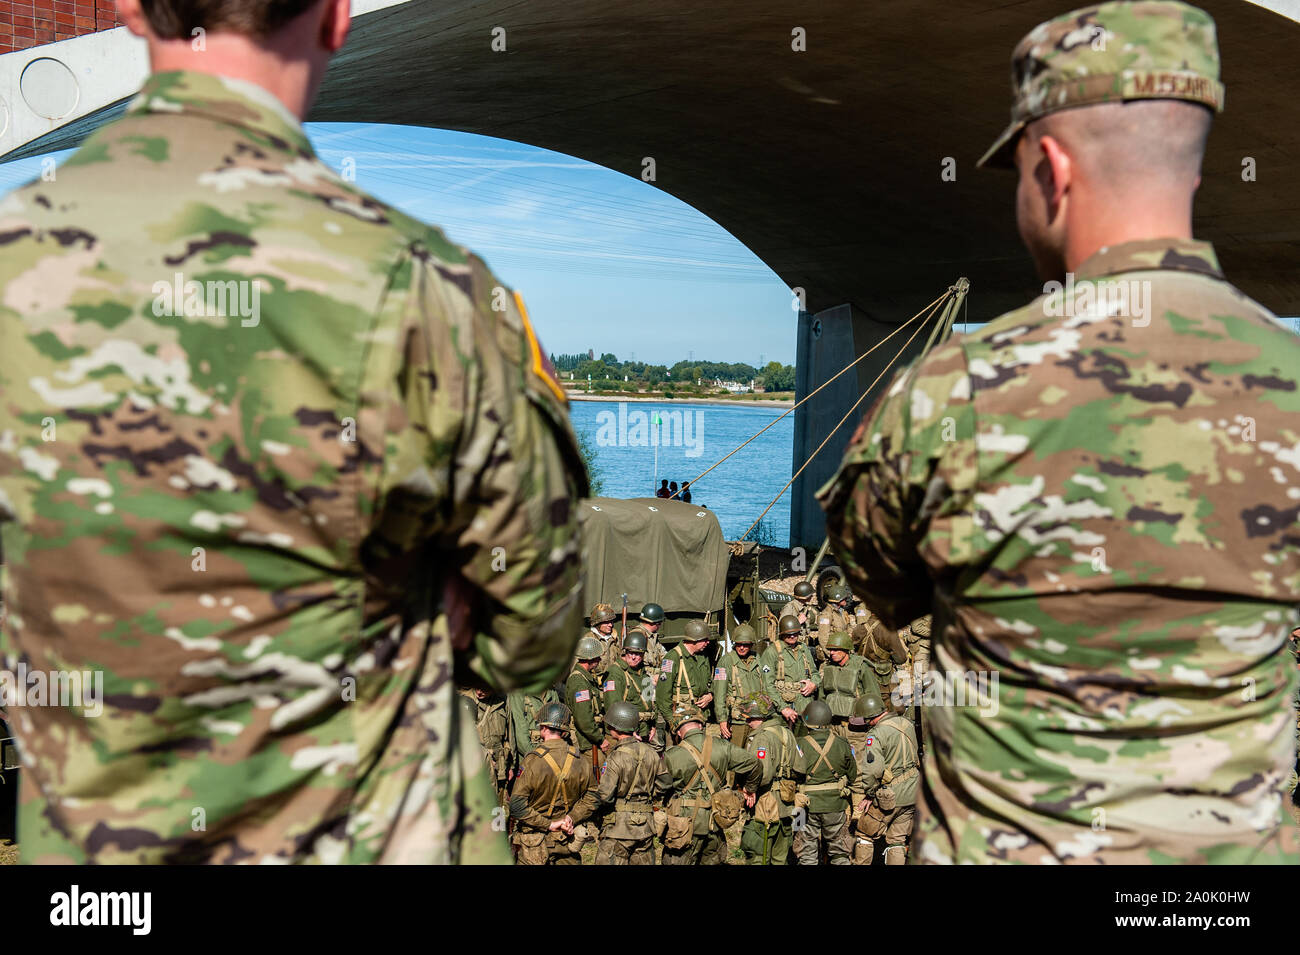 Two soldiers watch the recreation.On this day in 1944, 260 men of the 82nd Airborne Division went paddling to the other side of the Waal River. They reached the other side under heavy fire and managed to break through the German defence. However, half of them were injured or killed. Exactly 75 years later, 'Pontoon Group '40 -'45', in collaboration with Vereniging MARS and various other re-enactment associations, commemorated the  Waal crossing by paddling in the Waal river at the same exact locations. This event also belongs to the Commemorations of the 75 anniversary of Operation Market Gard Stock Photo